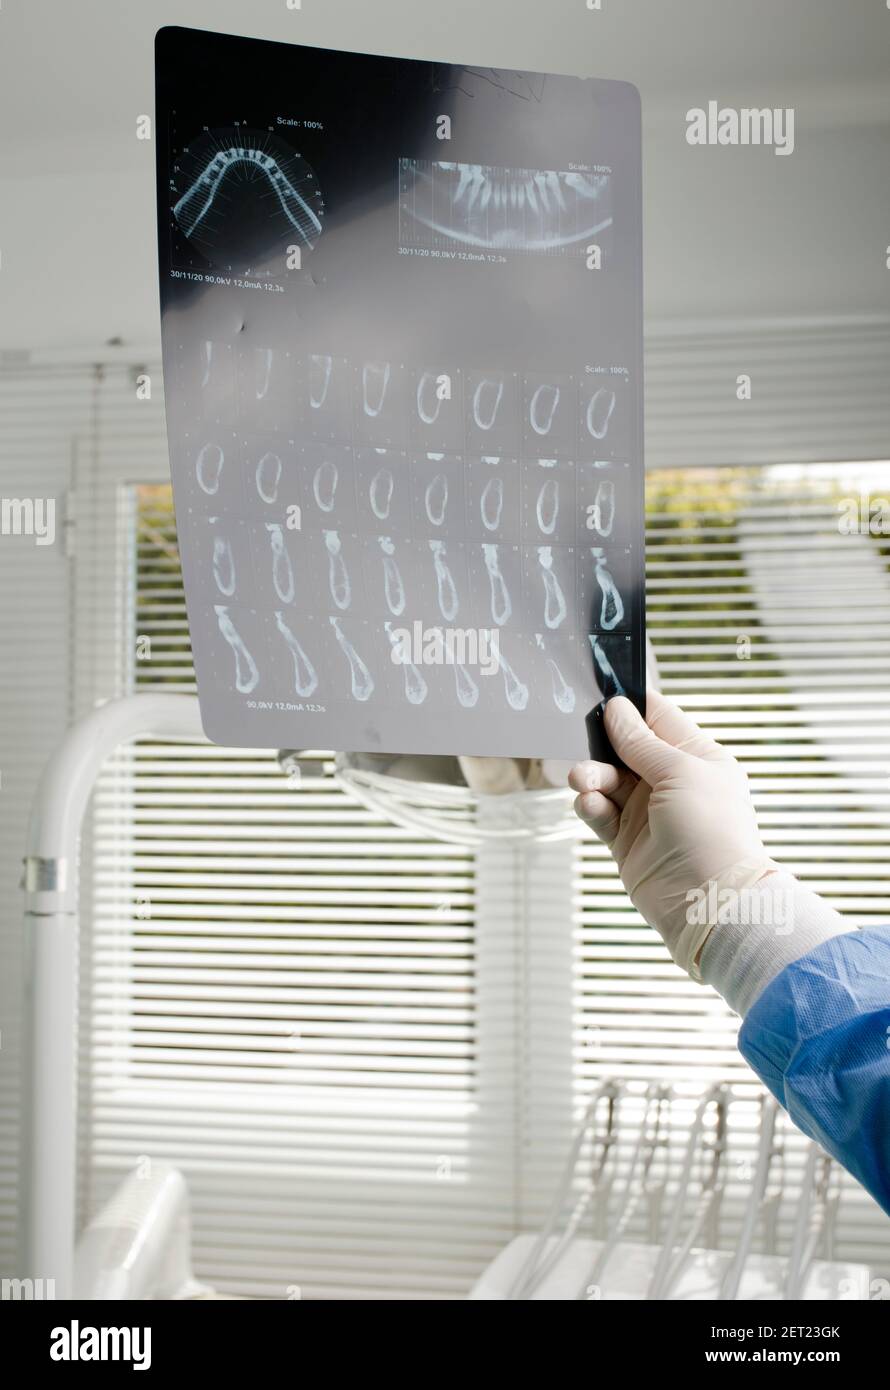 dental doctor, oral x-ray exams (oral radiography), dental clinic background Stock Photo